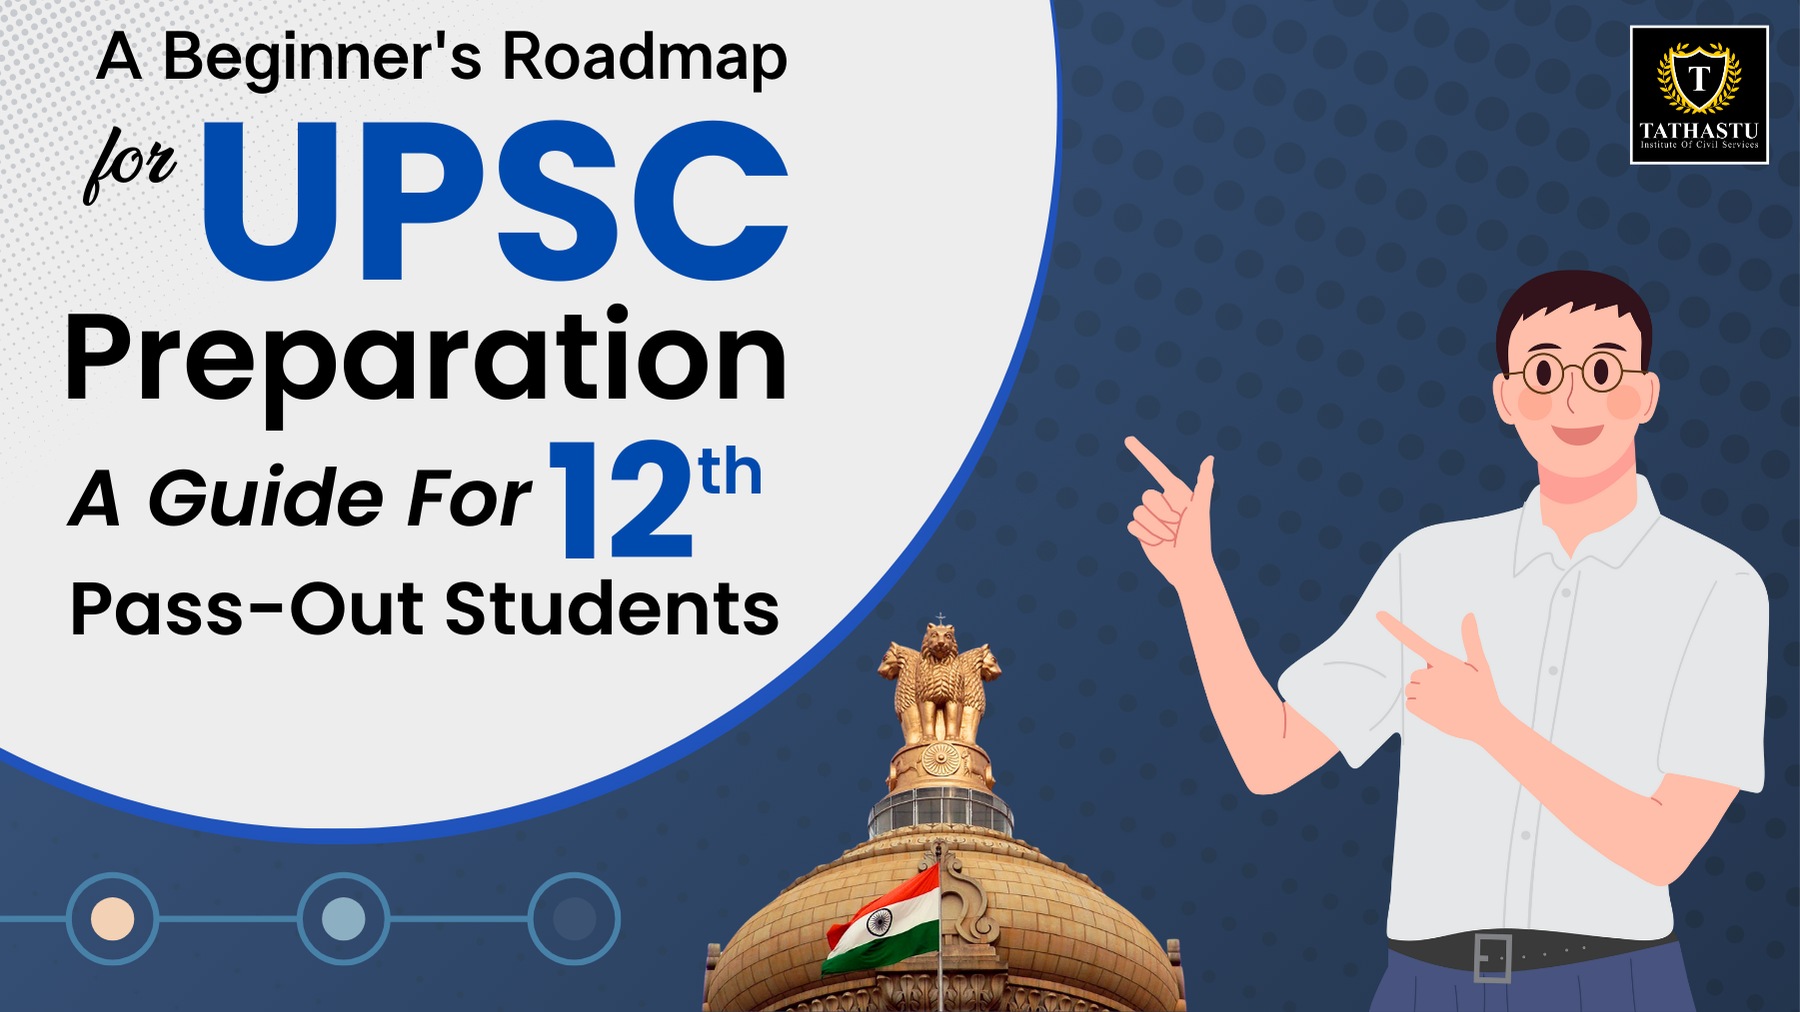 A Beginner's Roadmap For UPSC Preparation: A Guide For 12th Pass-Out Students